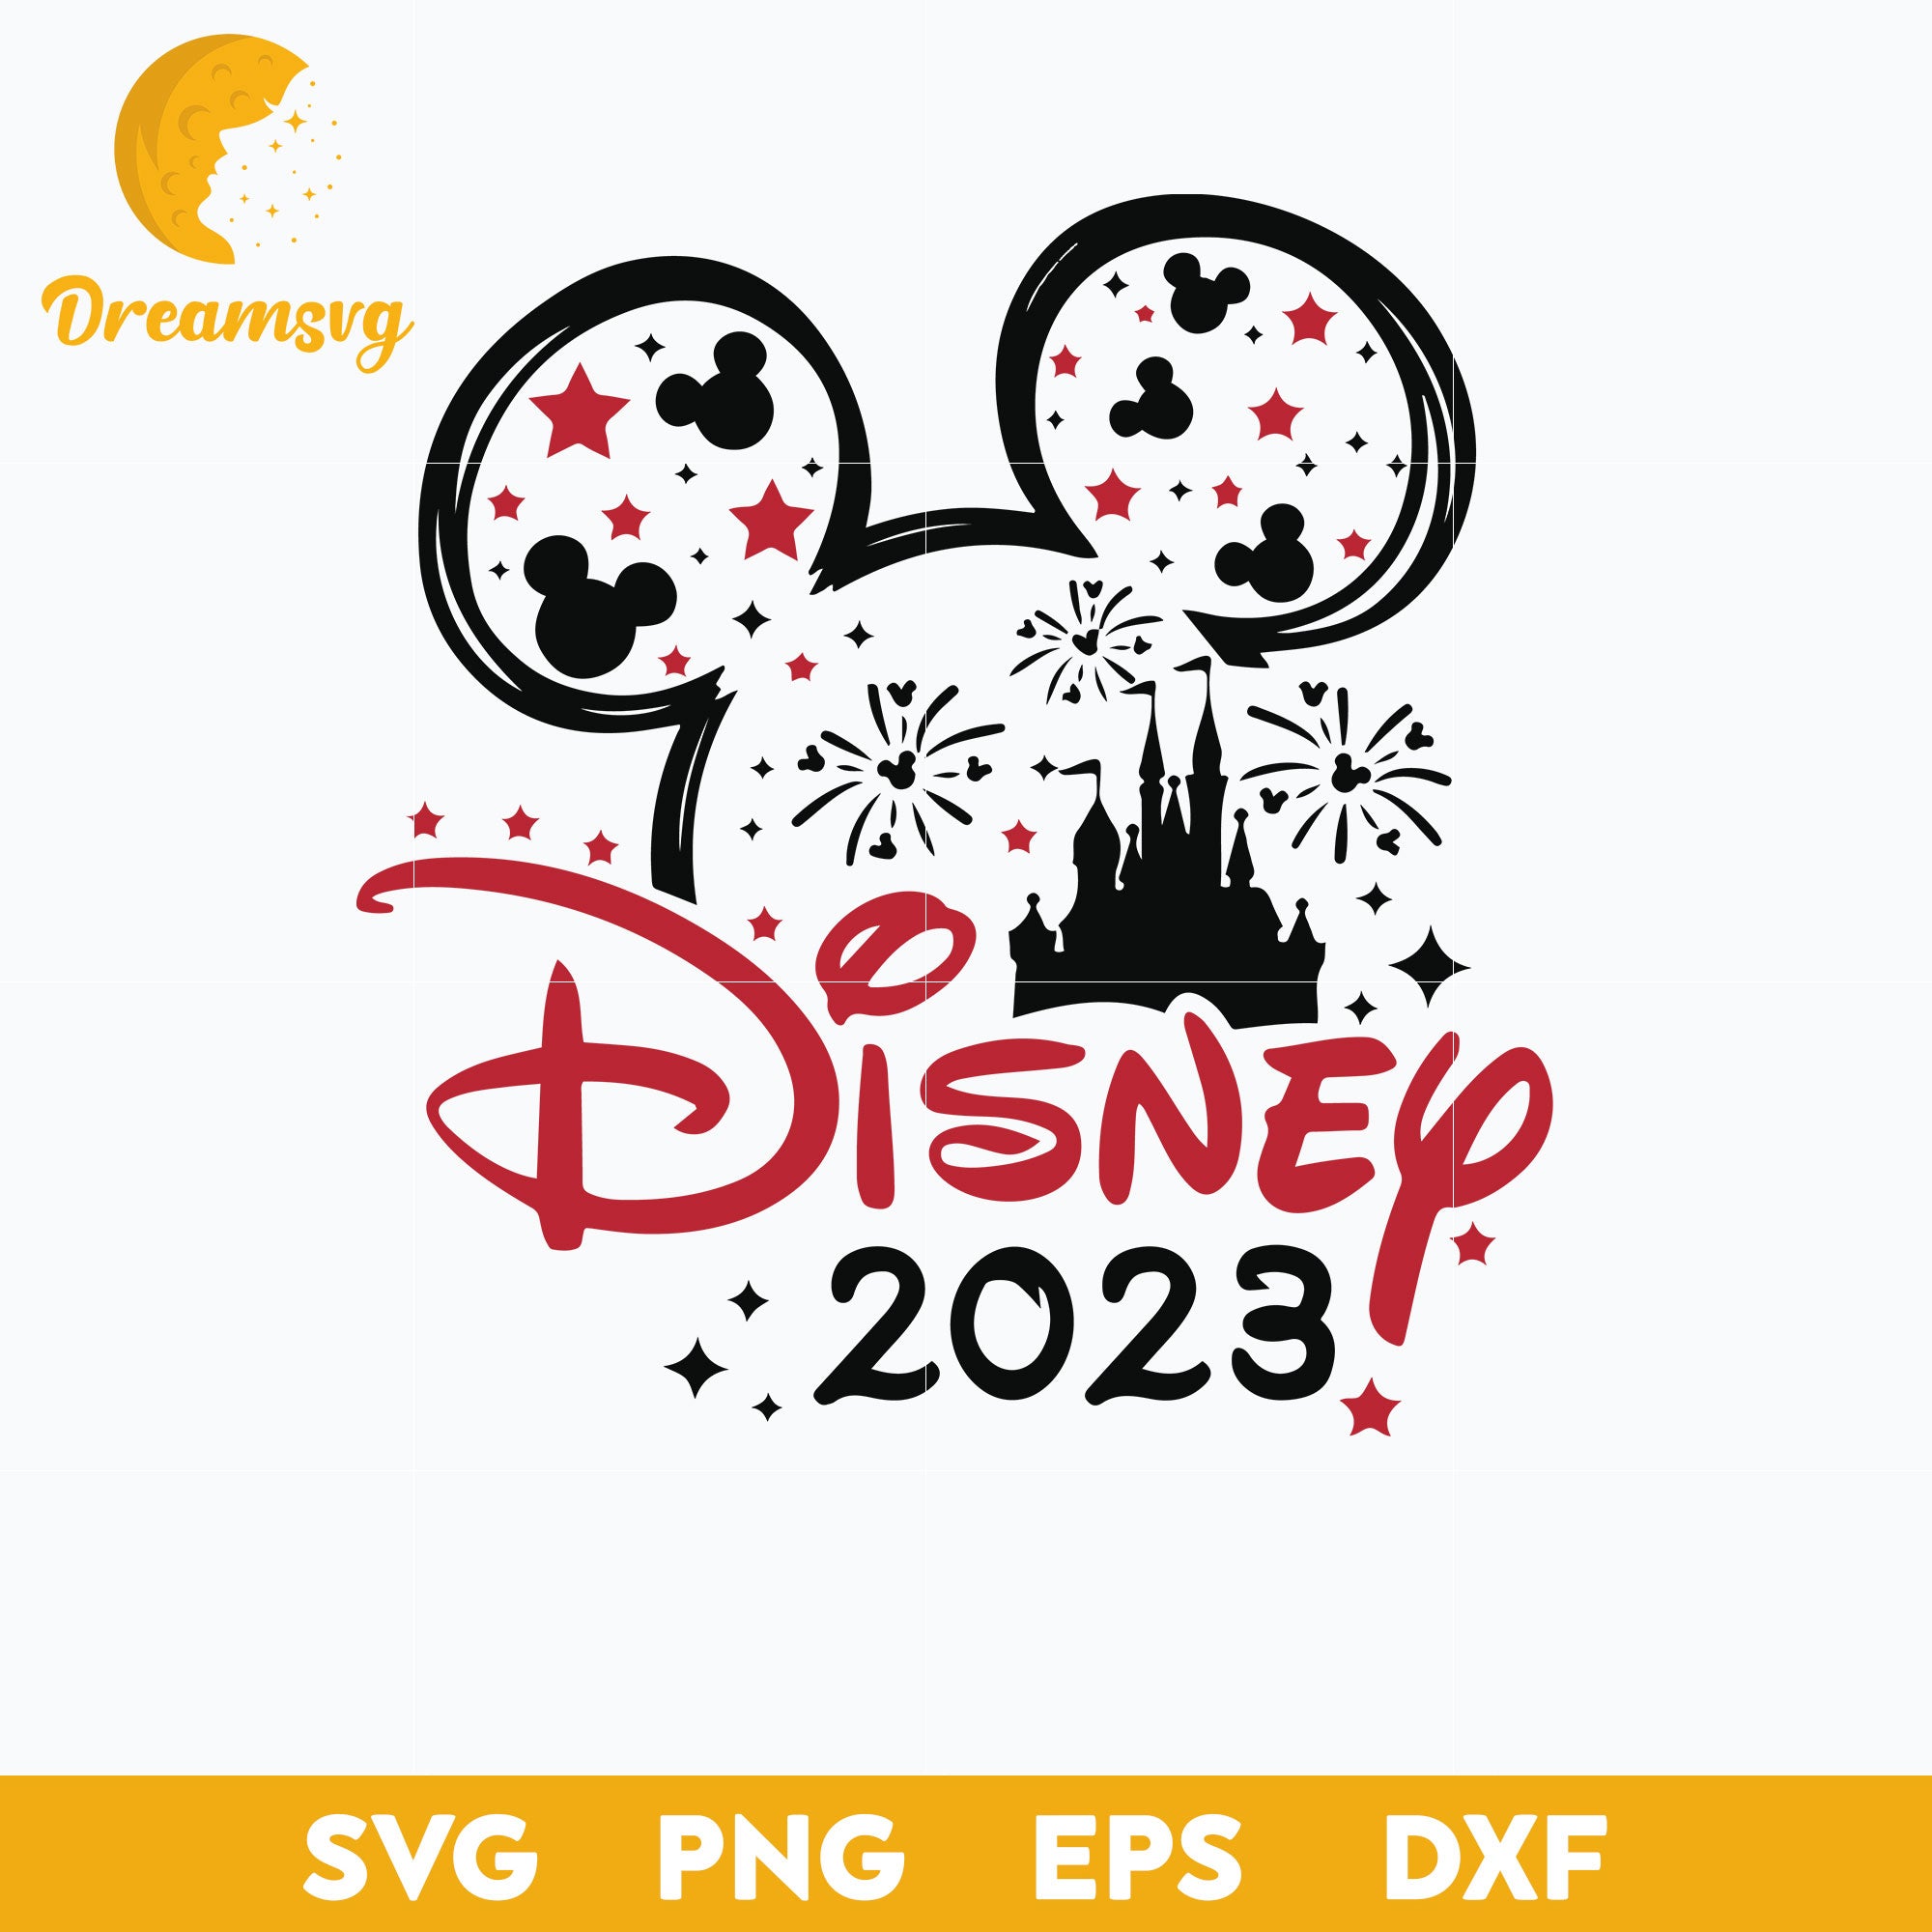 2023 Disney Squad Mickey Mouse or Minnie Iron on Transfer